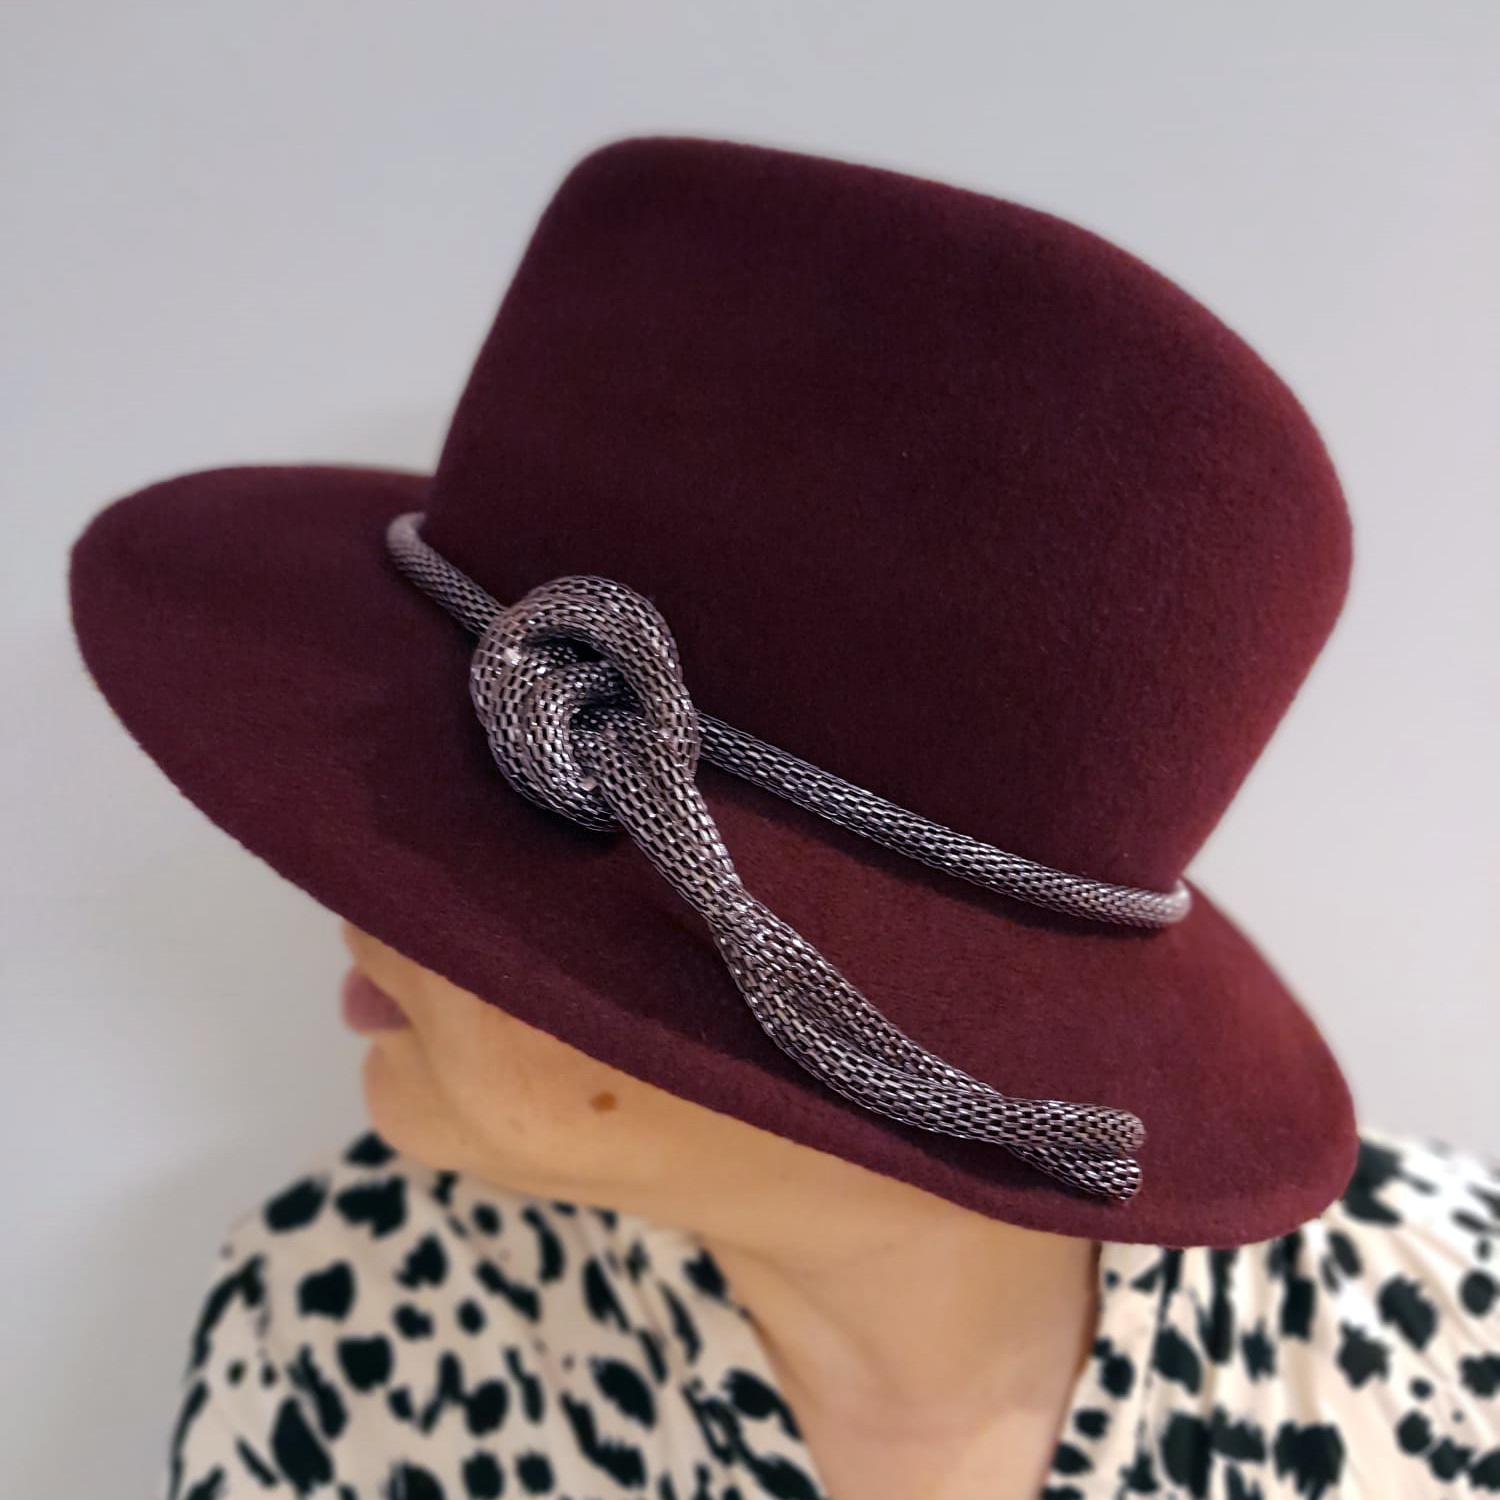 A woman a bespoke fedora. Her fur felt headpece is fitted with a silver chain tied in a knot for a modern & luxurious touch.